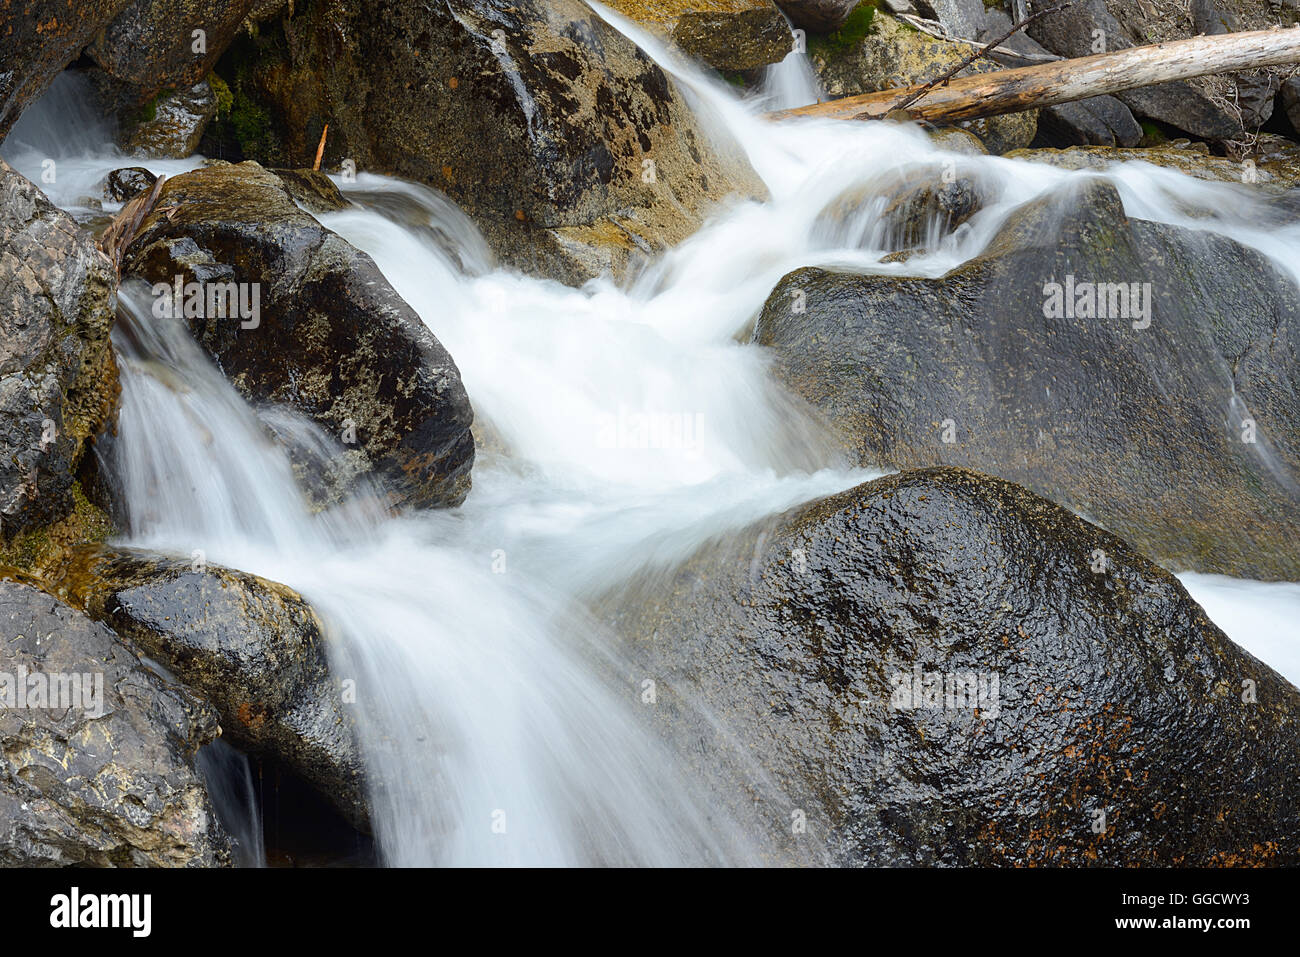 Flowing water and rocks Stock Photo